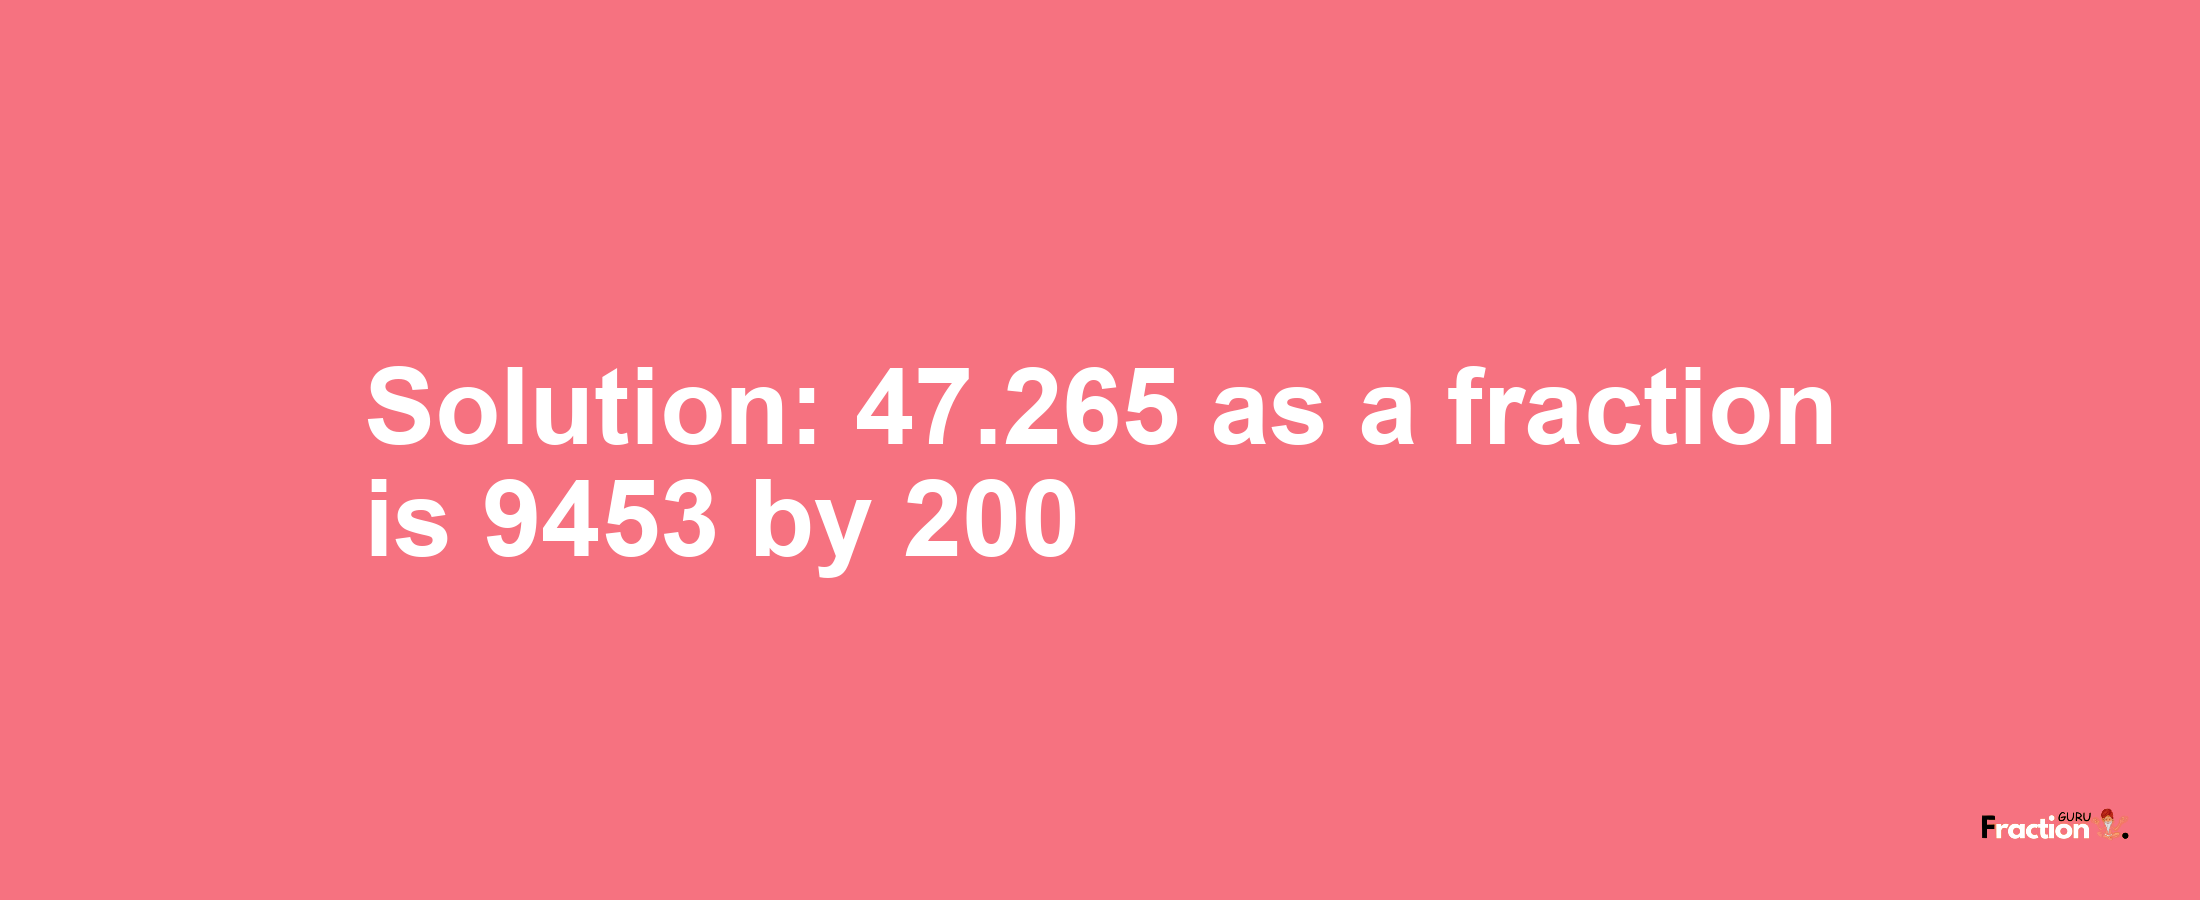 Solution:47.265 as a fraction is 9453/200